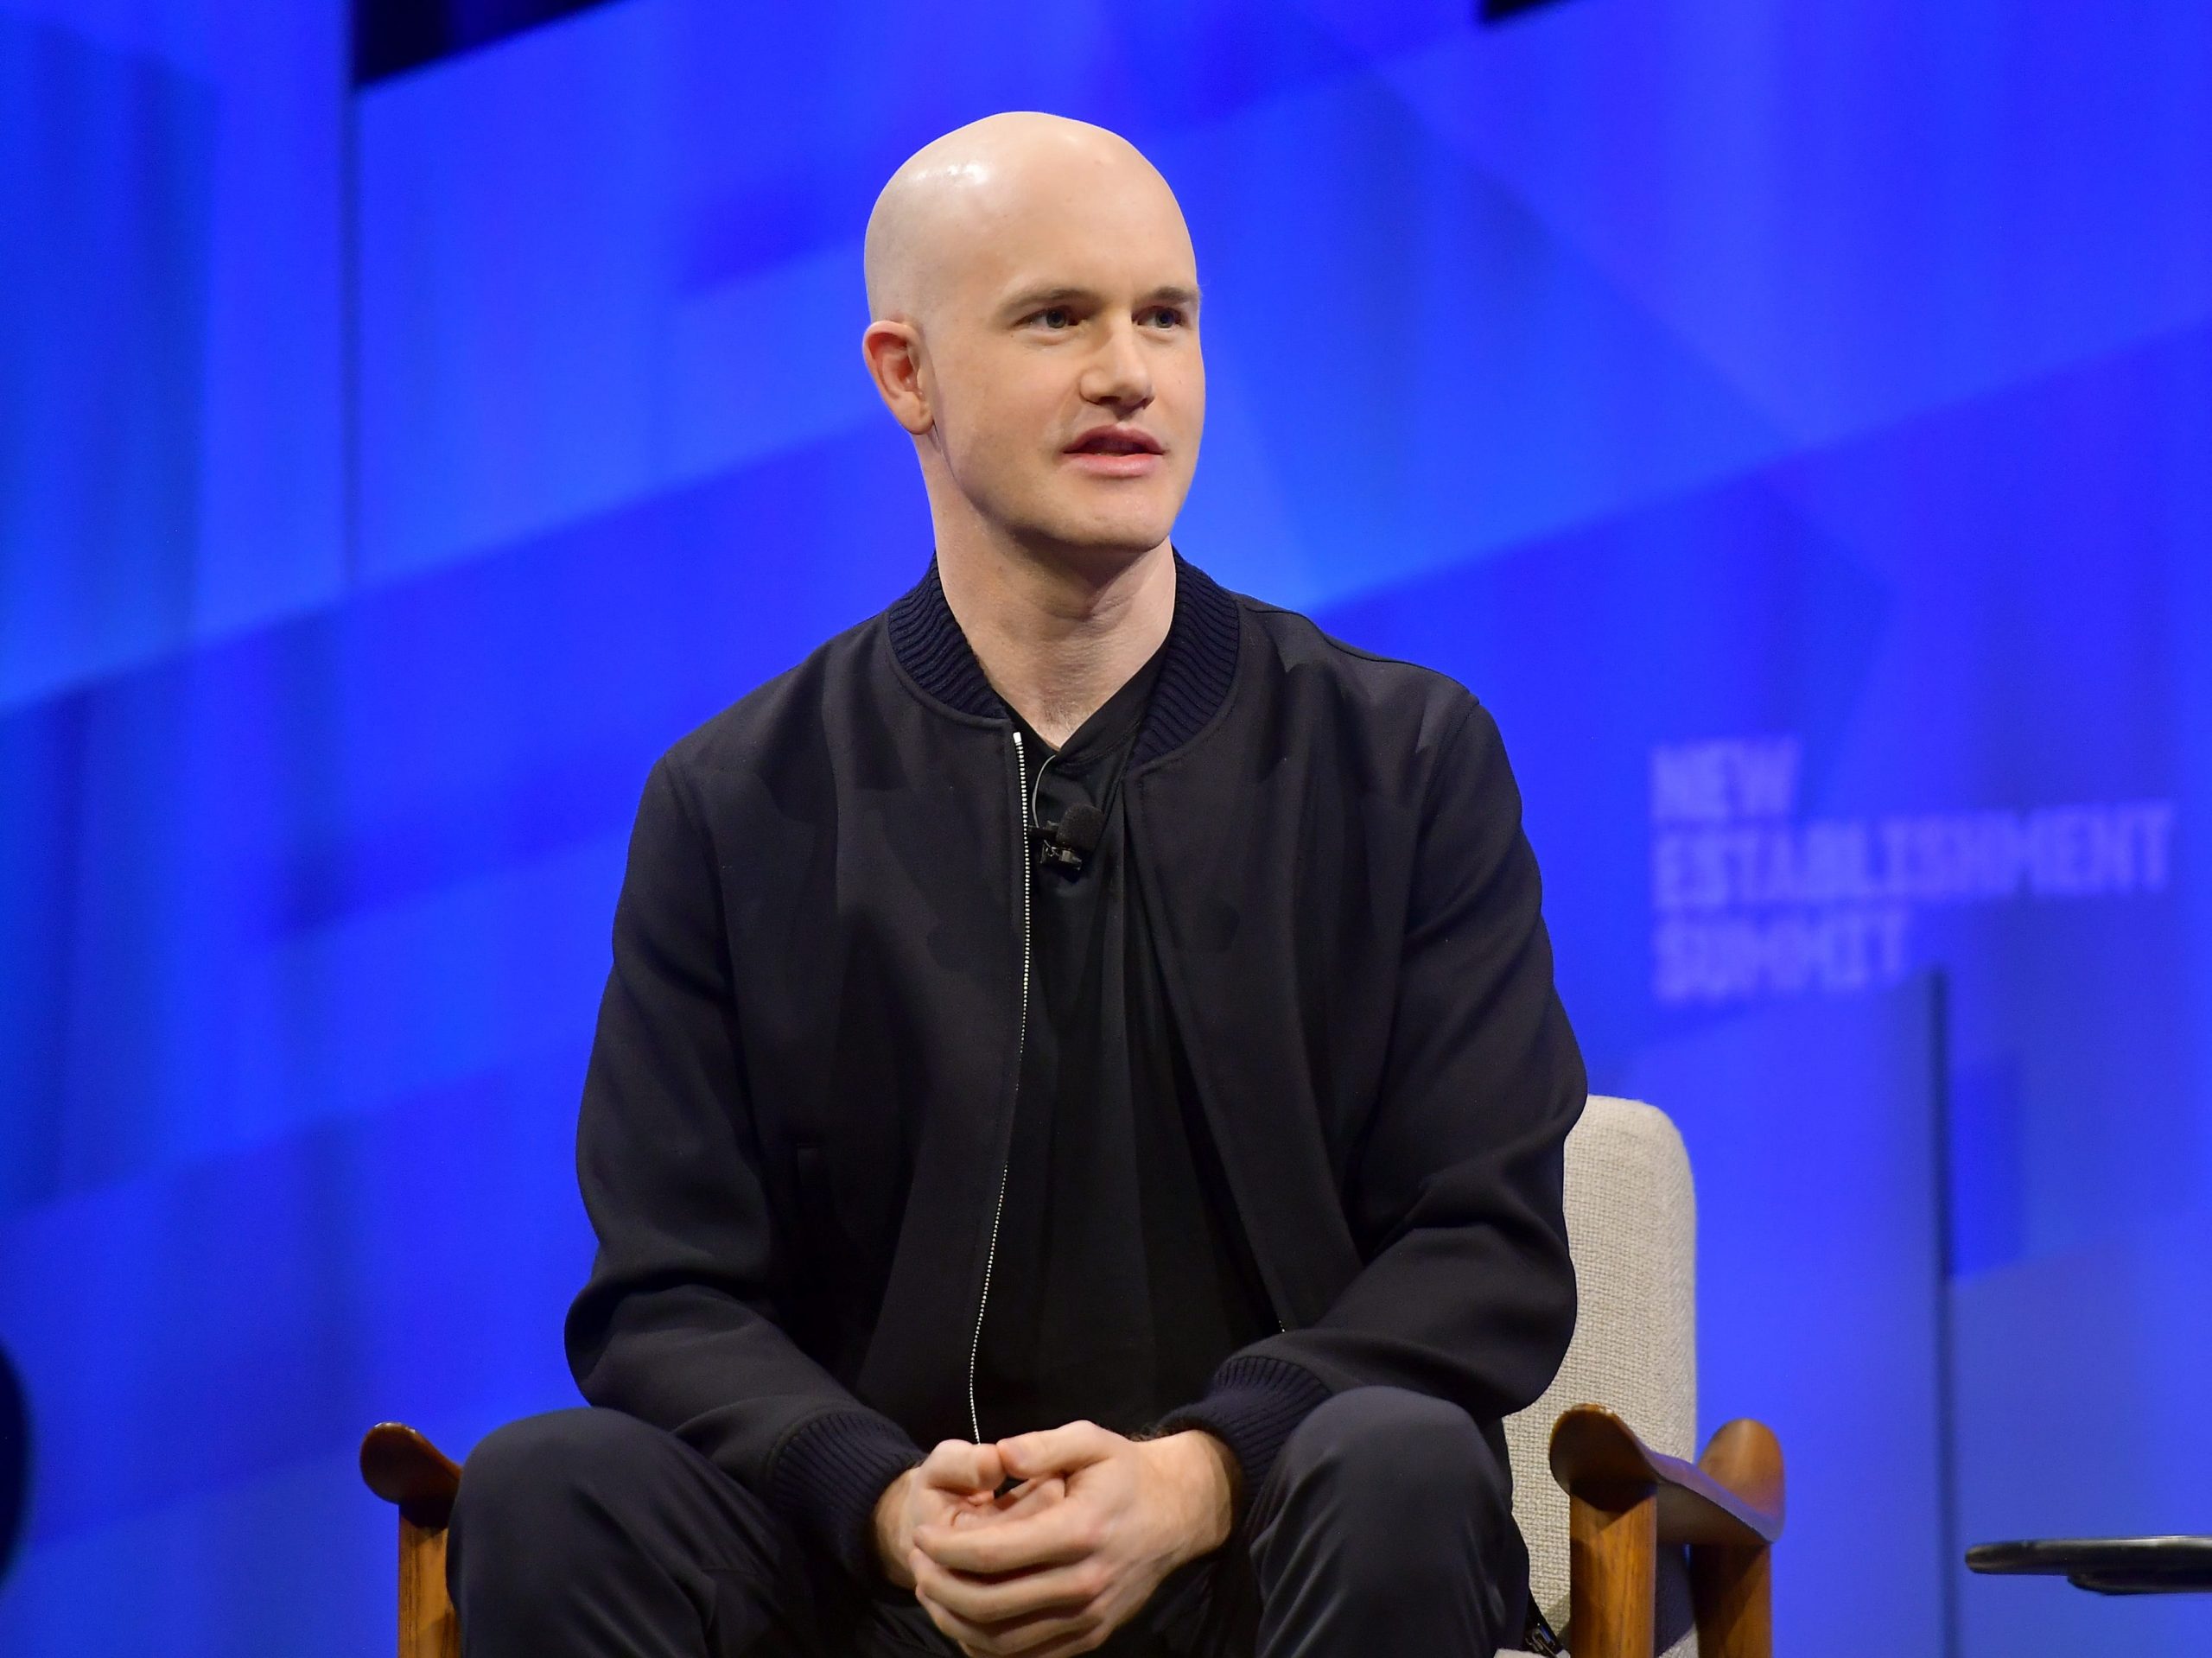 Brian Armstrong, cofounder and CEO of Coinbase speaks onstage during 'Tales from the Crypto: What the Currency of the Future Means for You' at Vanity Fair's 6th Annual New Establishment Summit at Wallis Annenberg Center for the Performing Arts on October 23, 2019 in Beverly Hills, California.